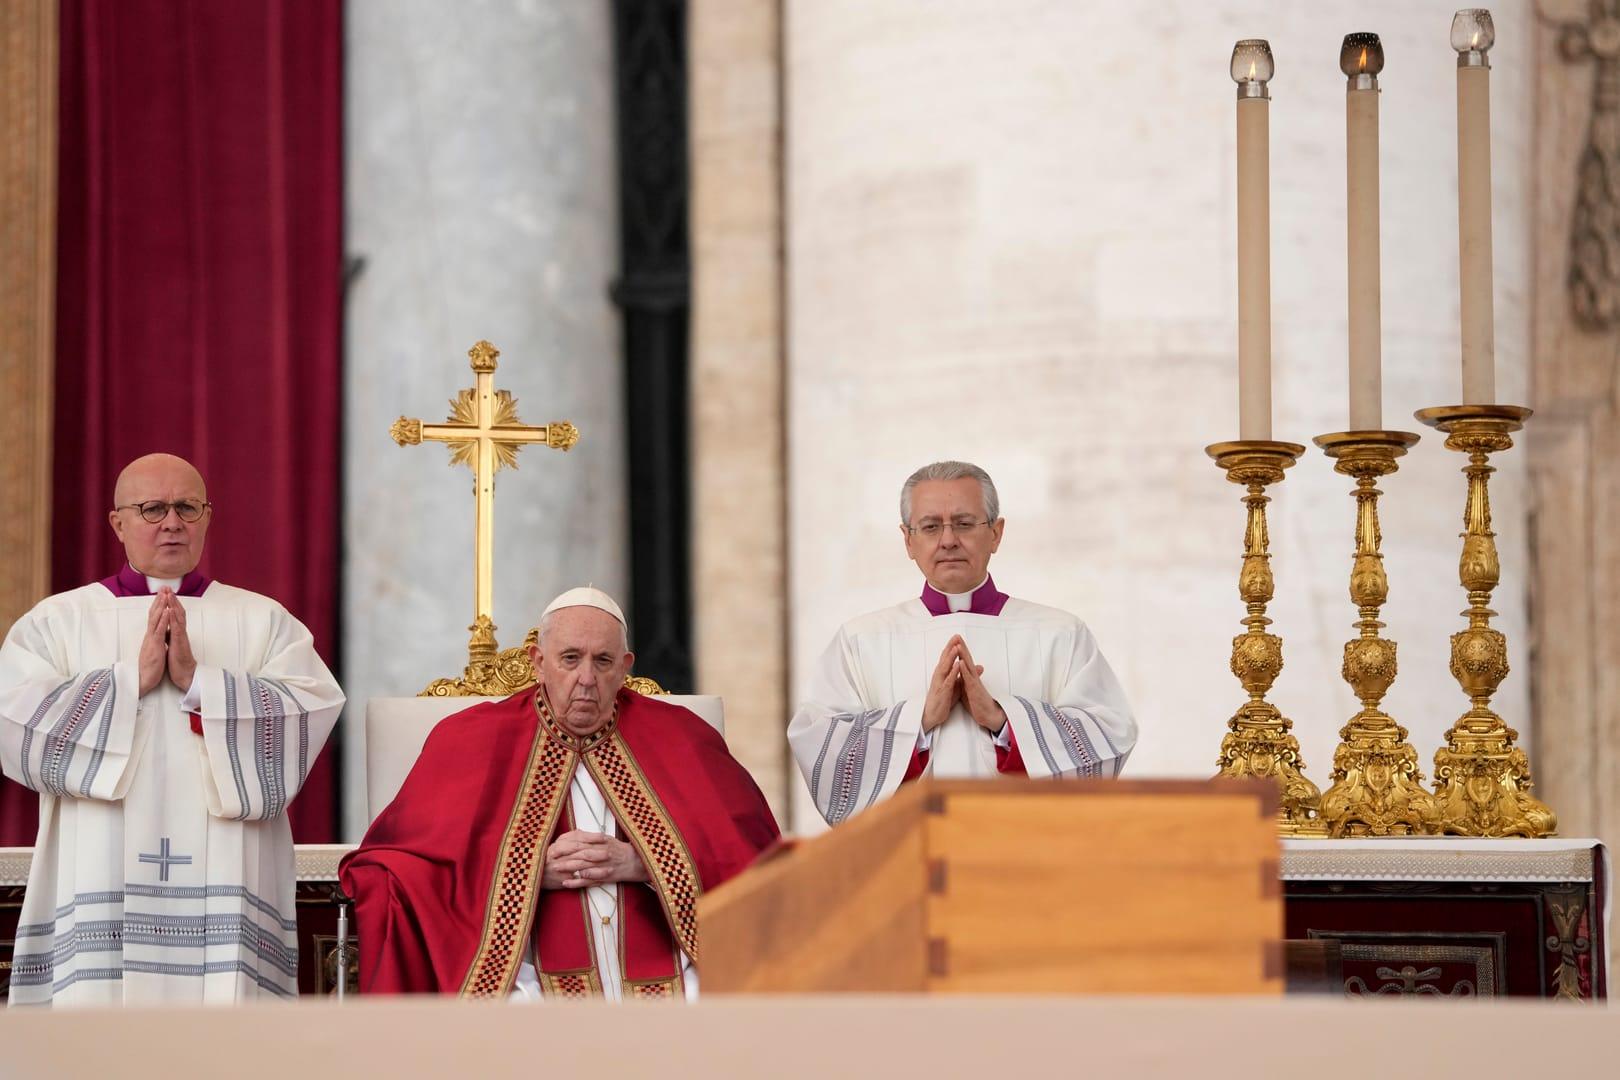 Cardinals in different camps agree papal resignation should be rare